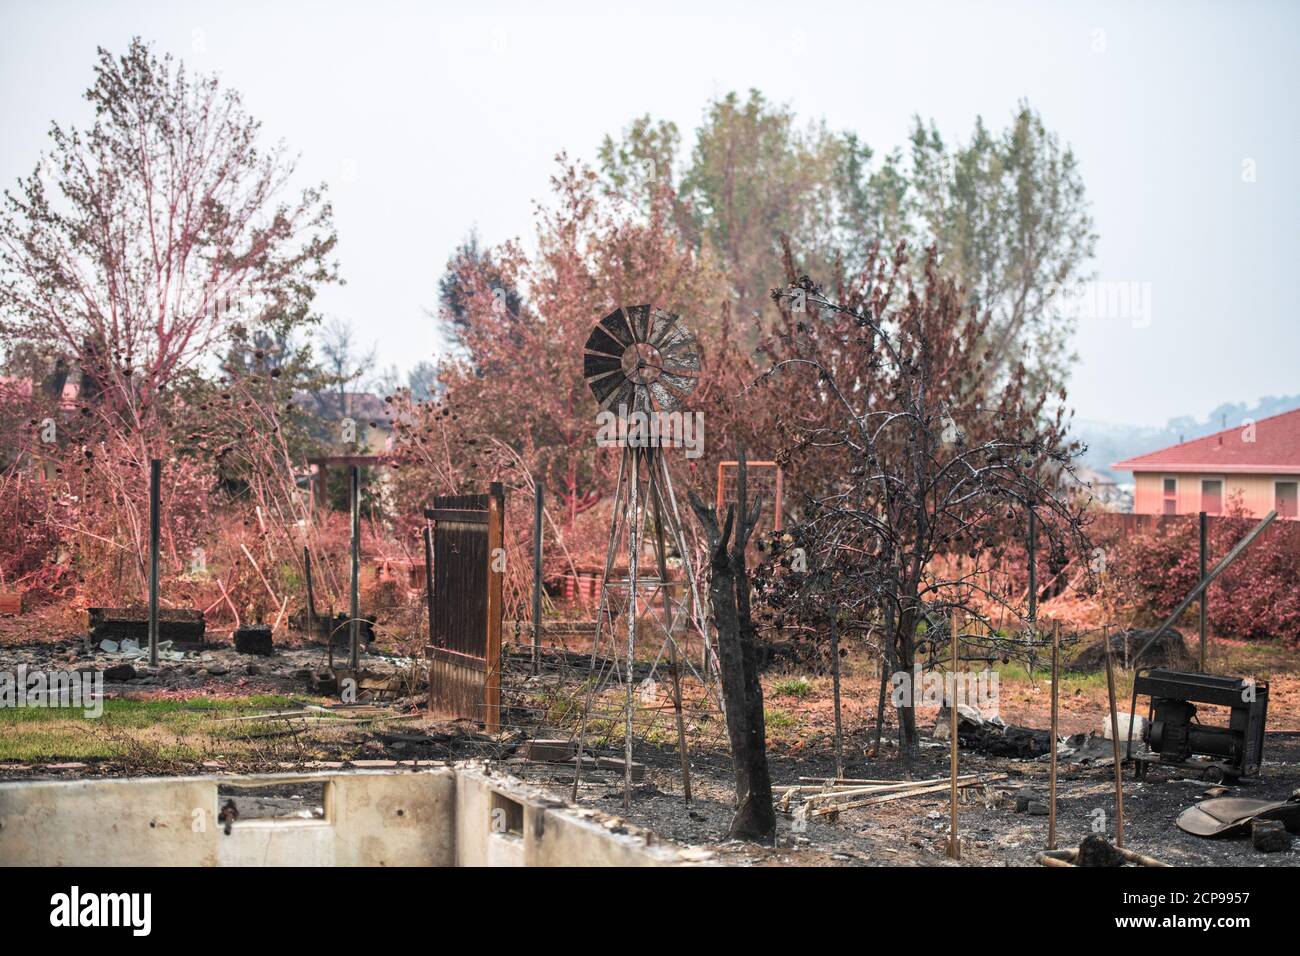 Talent, Ore. 18th Sep, 2020. A general view of the Talent Mobile Estates #81 which were sprayed with fire retardent during the Almeda Fire. The town of Talent, Oregon, showing the burned out homes, cars and rubble left behind. In Talent, about 20 miles north of the California border, homes were charred beyond recognition. Across the western US, at least 87 wildfires are burning, according to the National Interagency Fire Center. They've torched more than 4.7 million acres -- more than six times the area of Rhode Island. Credit: Chris Tuite/Image Space/Media Punch/Alamy Live News Stock Photo